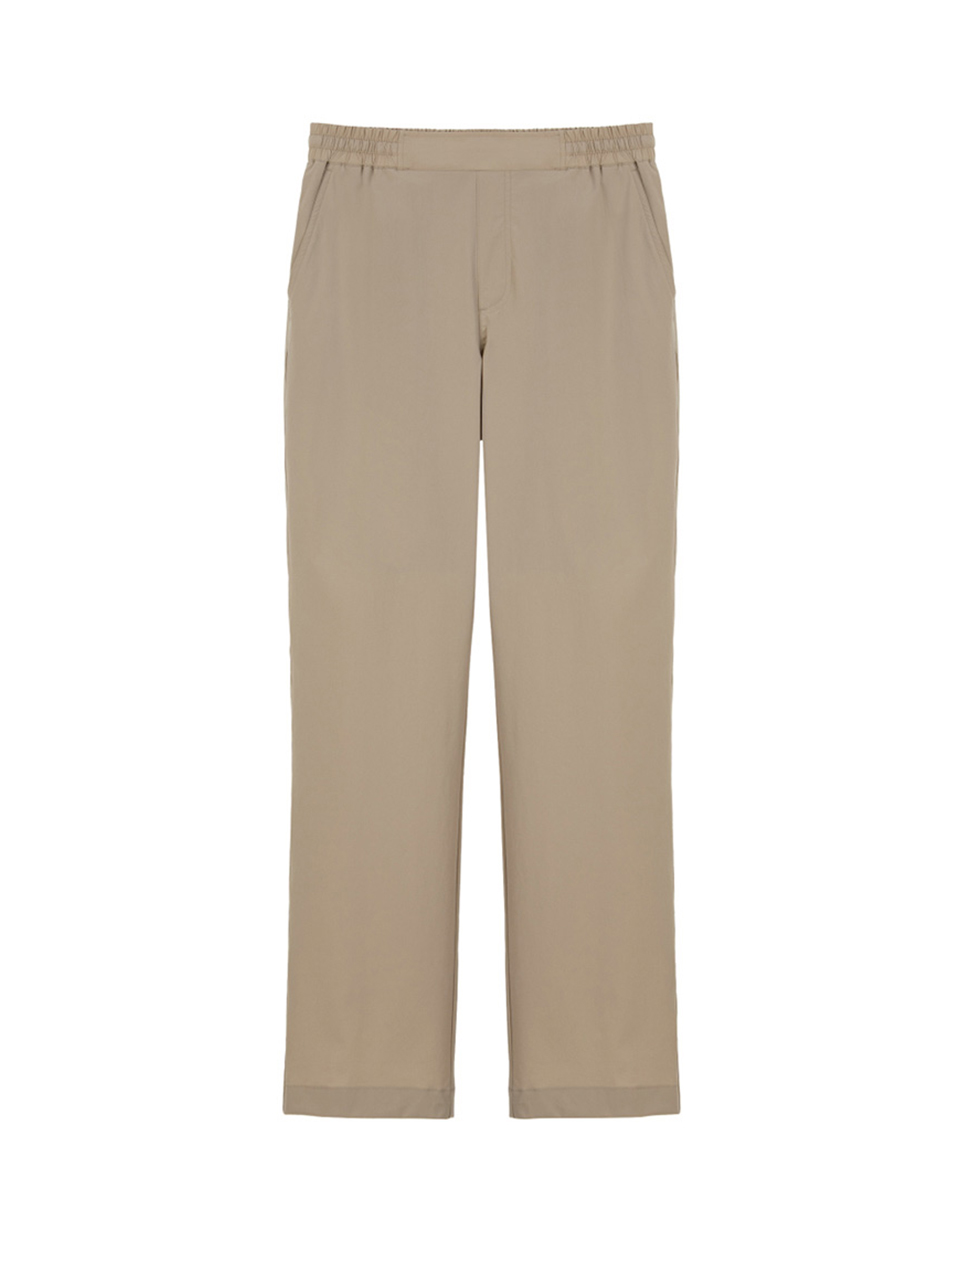 [LIMITED] SUMMER STRETCH SOLID COOL PANTS (FOR MAN) - BUFF BEIGE